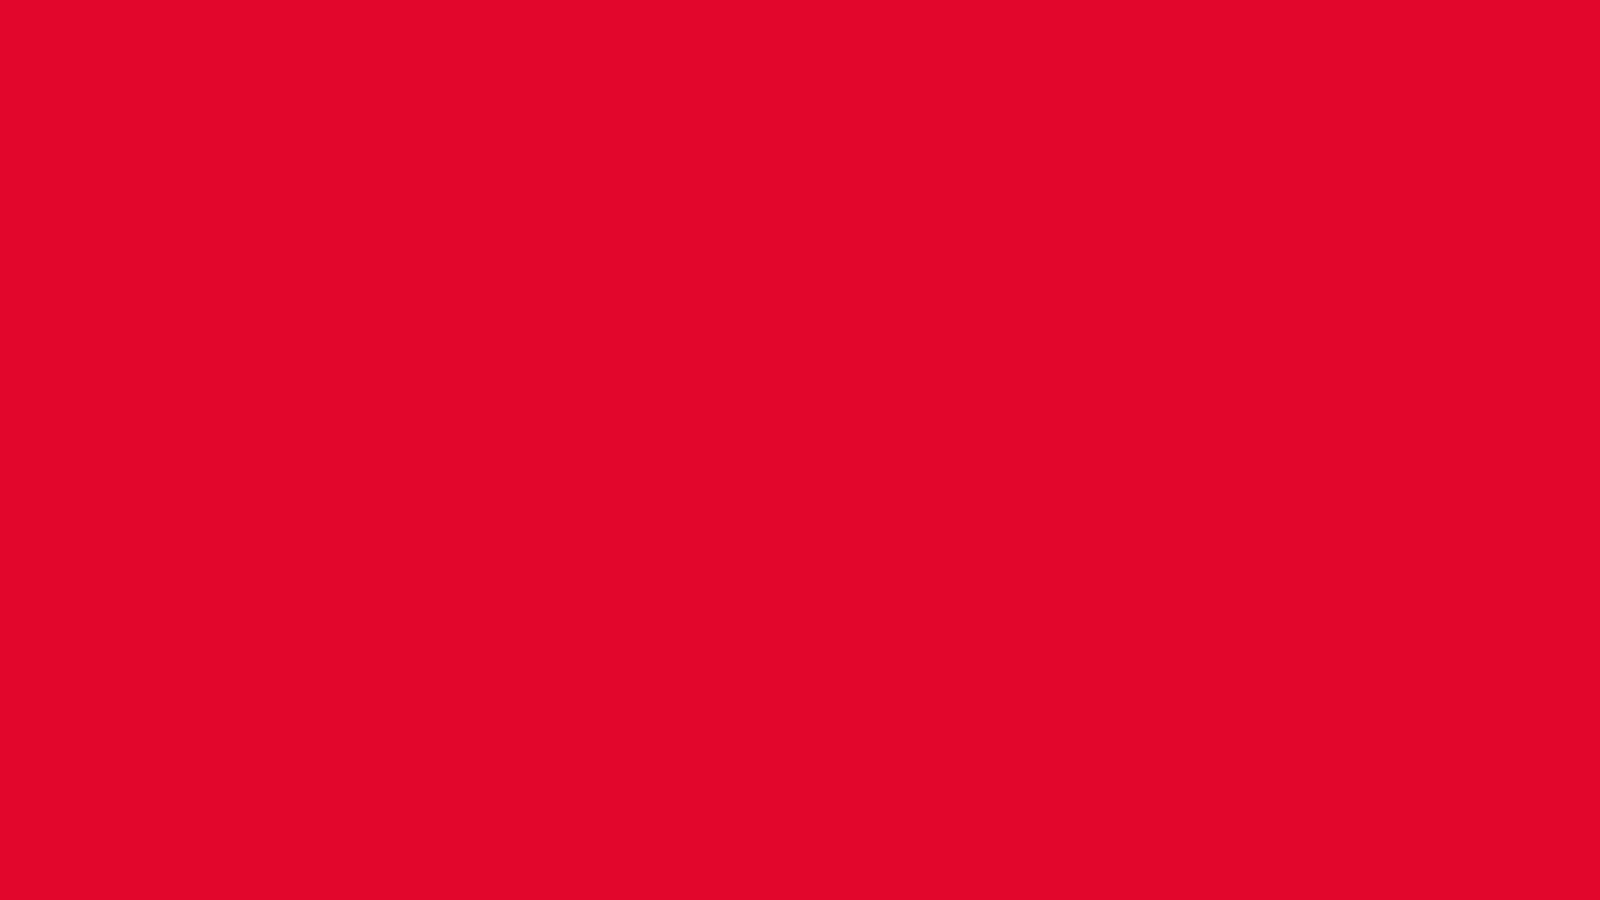 1600x900 Medium Candy Apple Red Solid Color Background